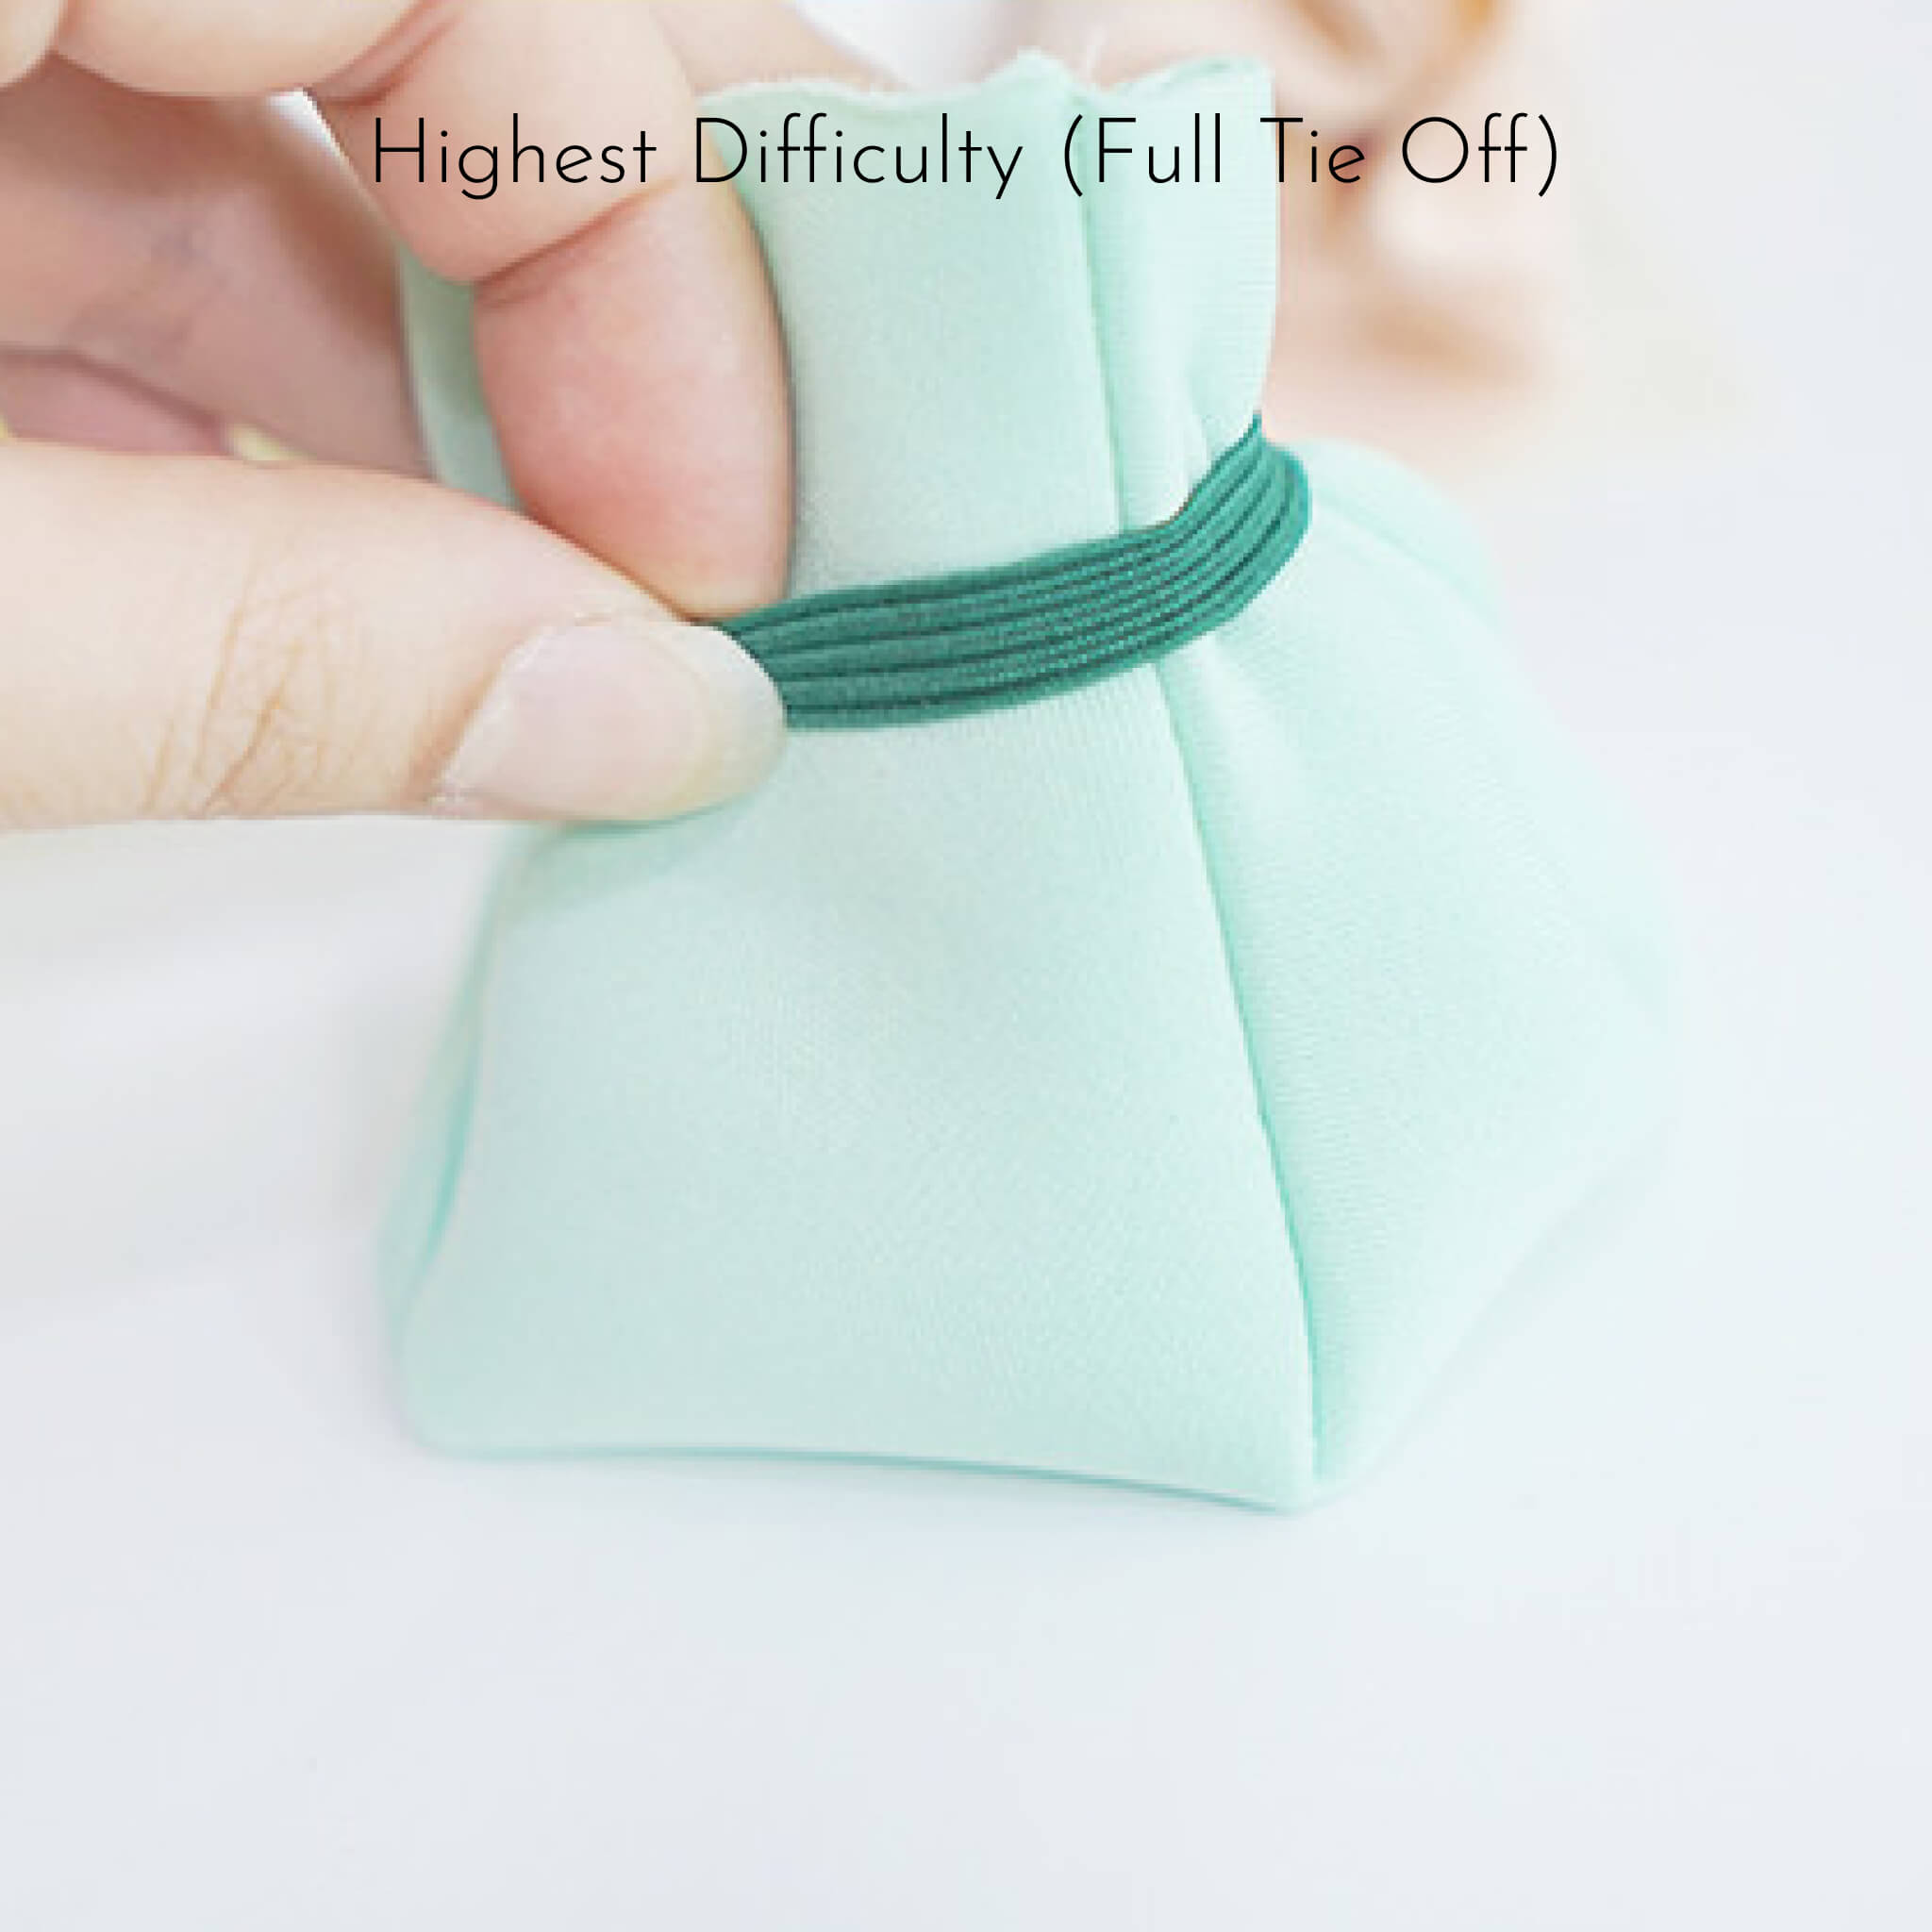 Highest level of difficulty fold.